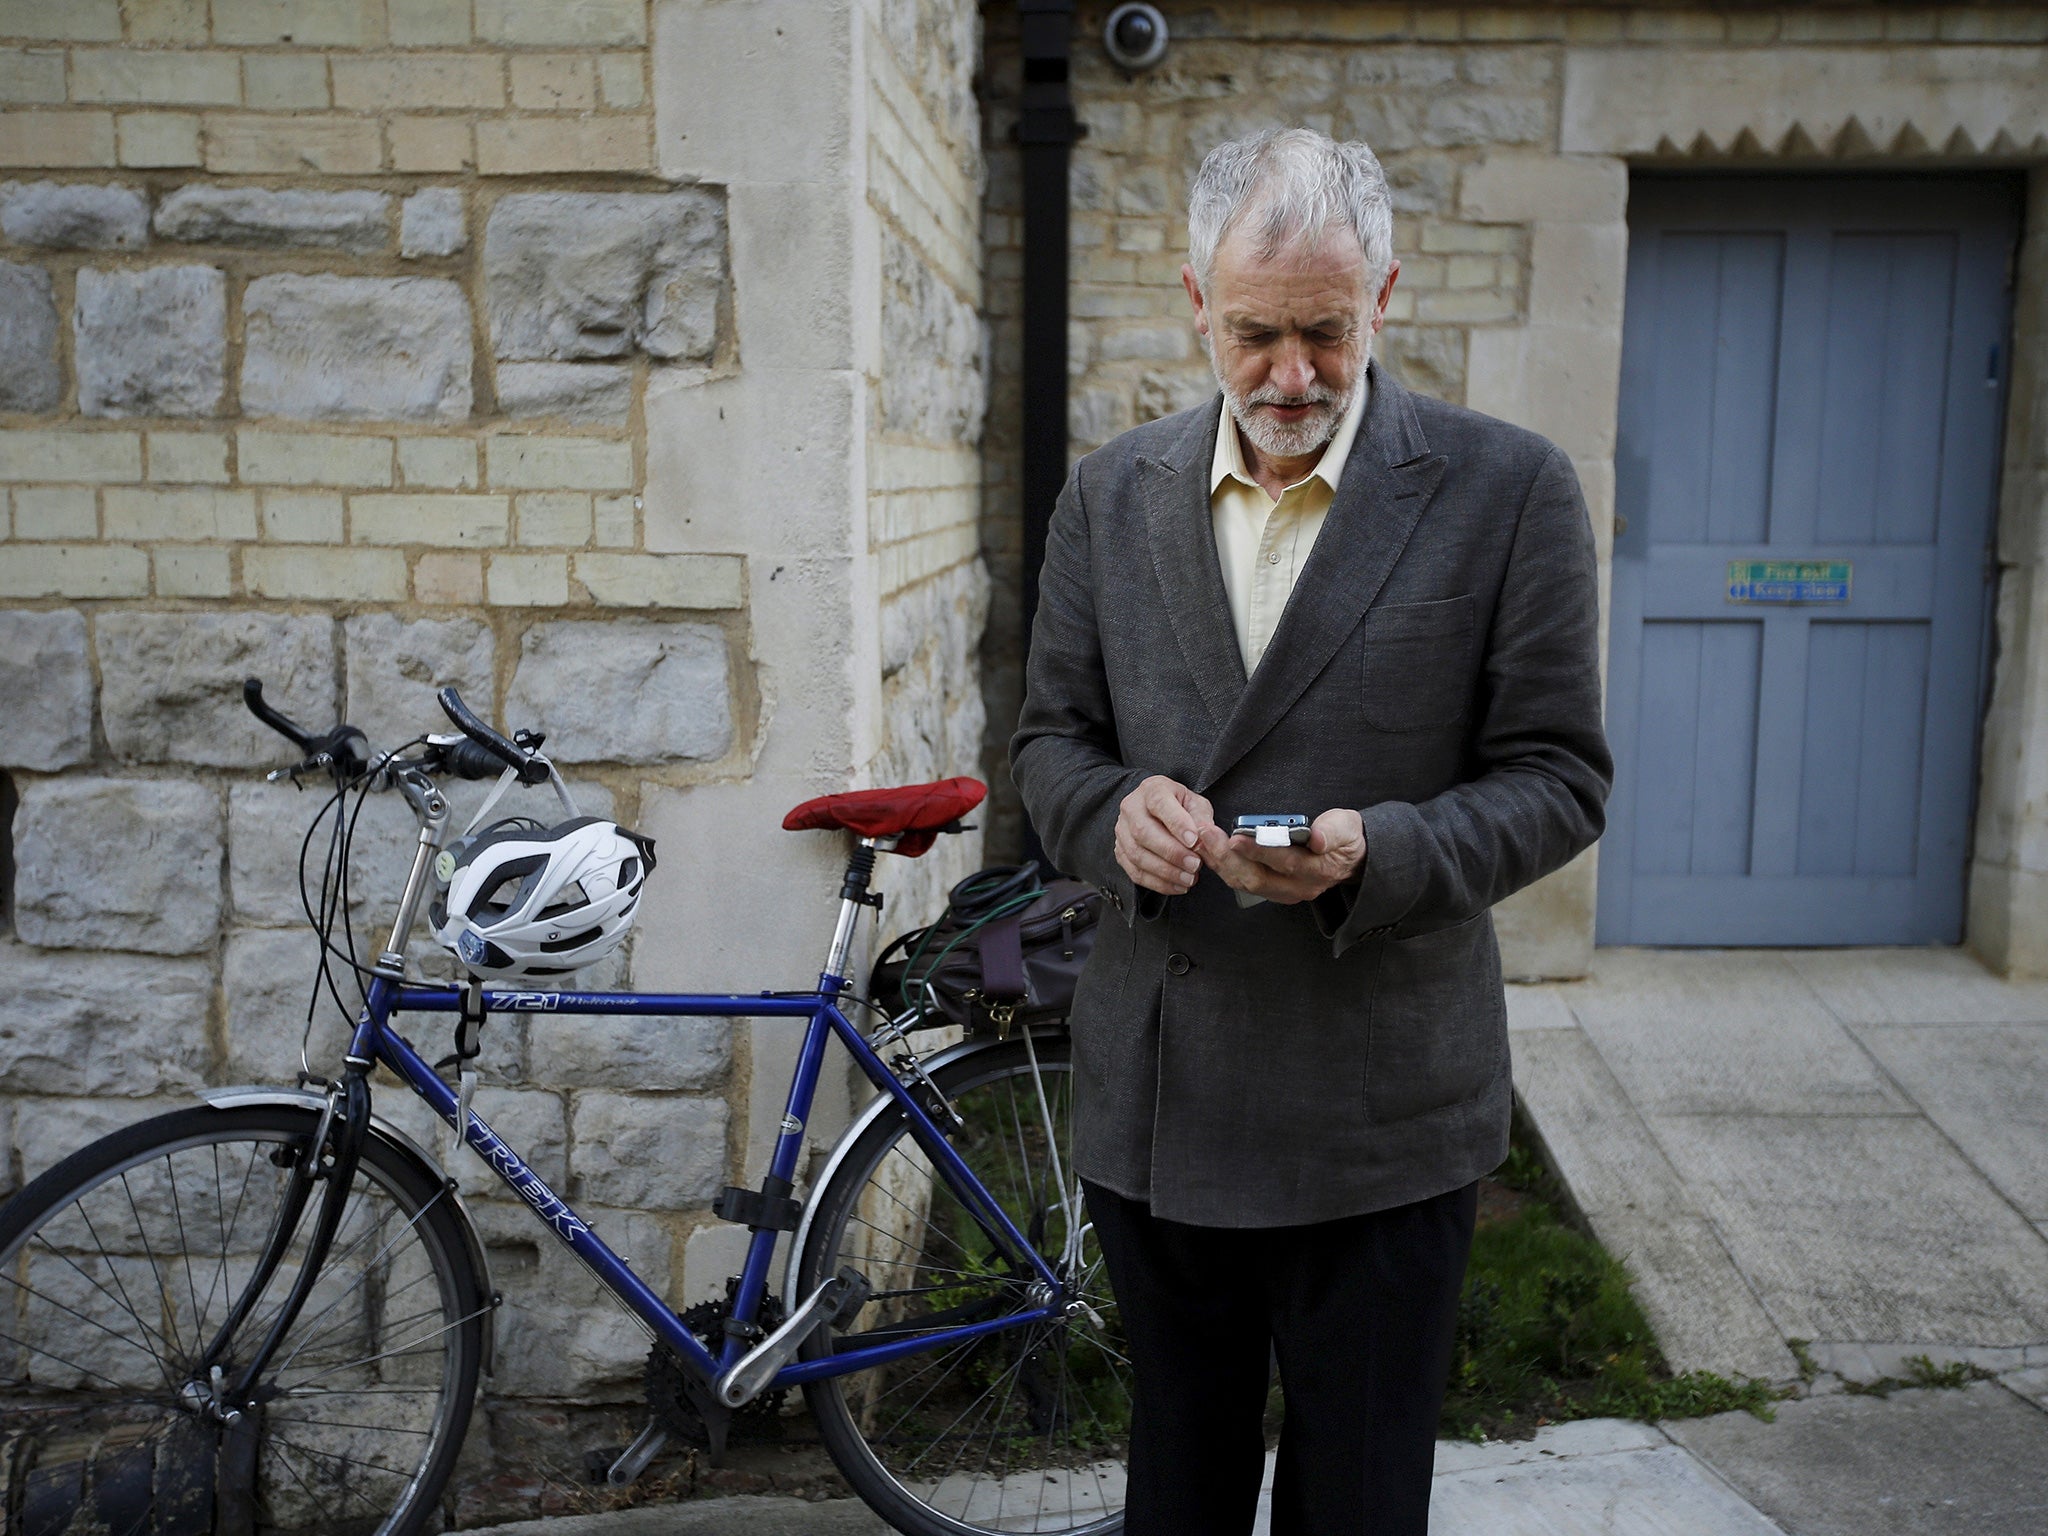 Labour Party leadership candidate Jeremy Corbyn checks his phone after arriving on his bicycle for a rally in London (Reuters)